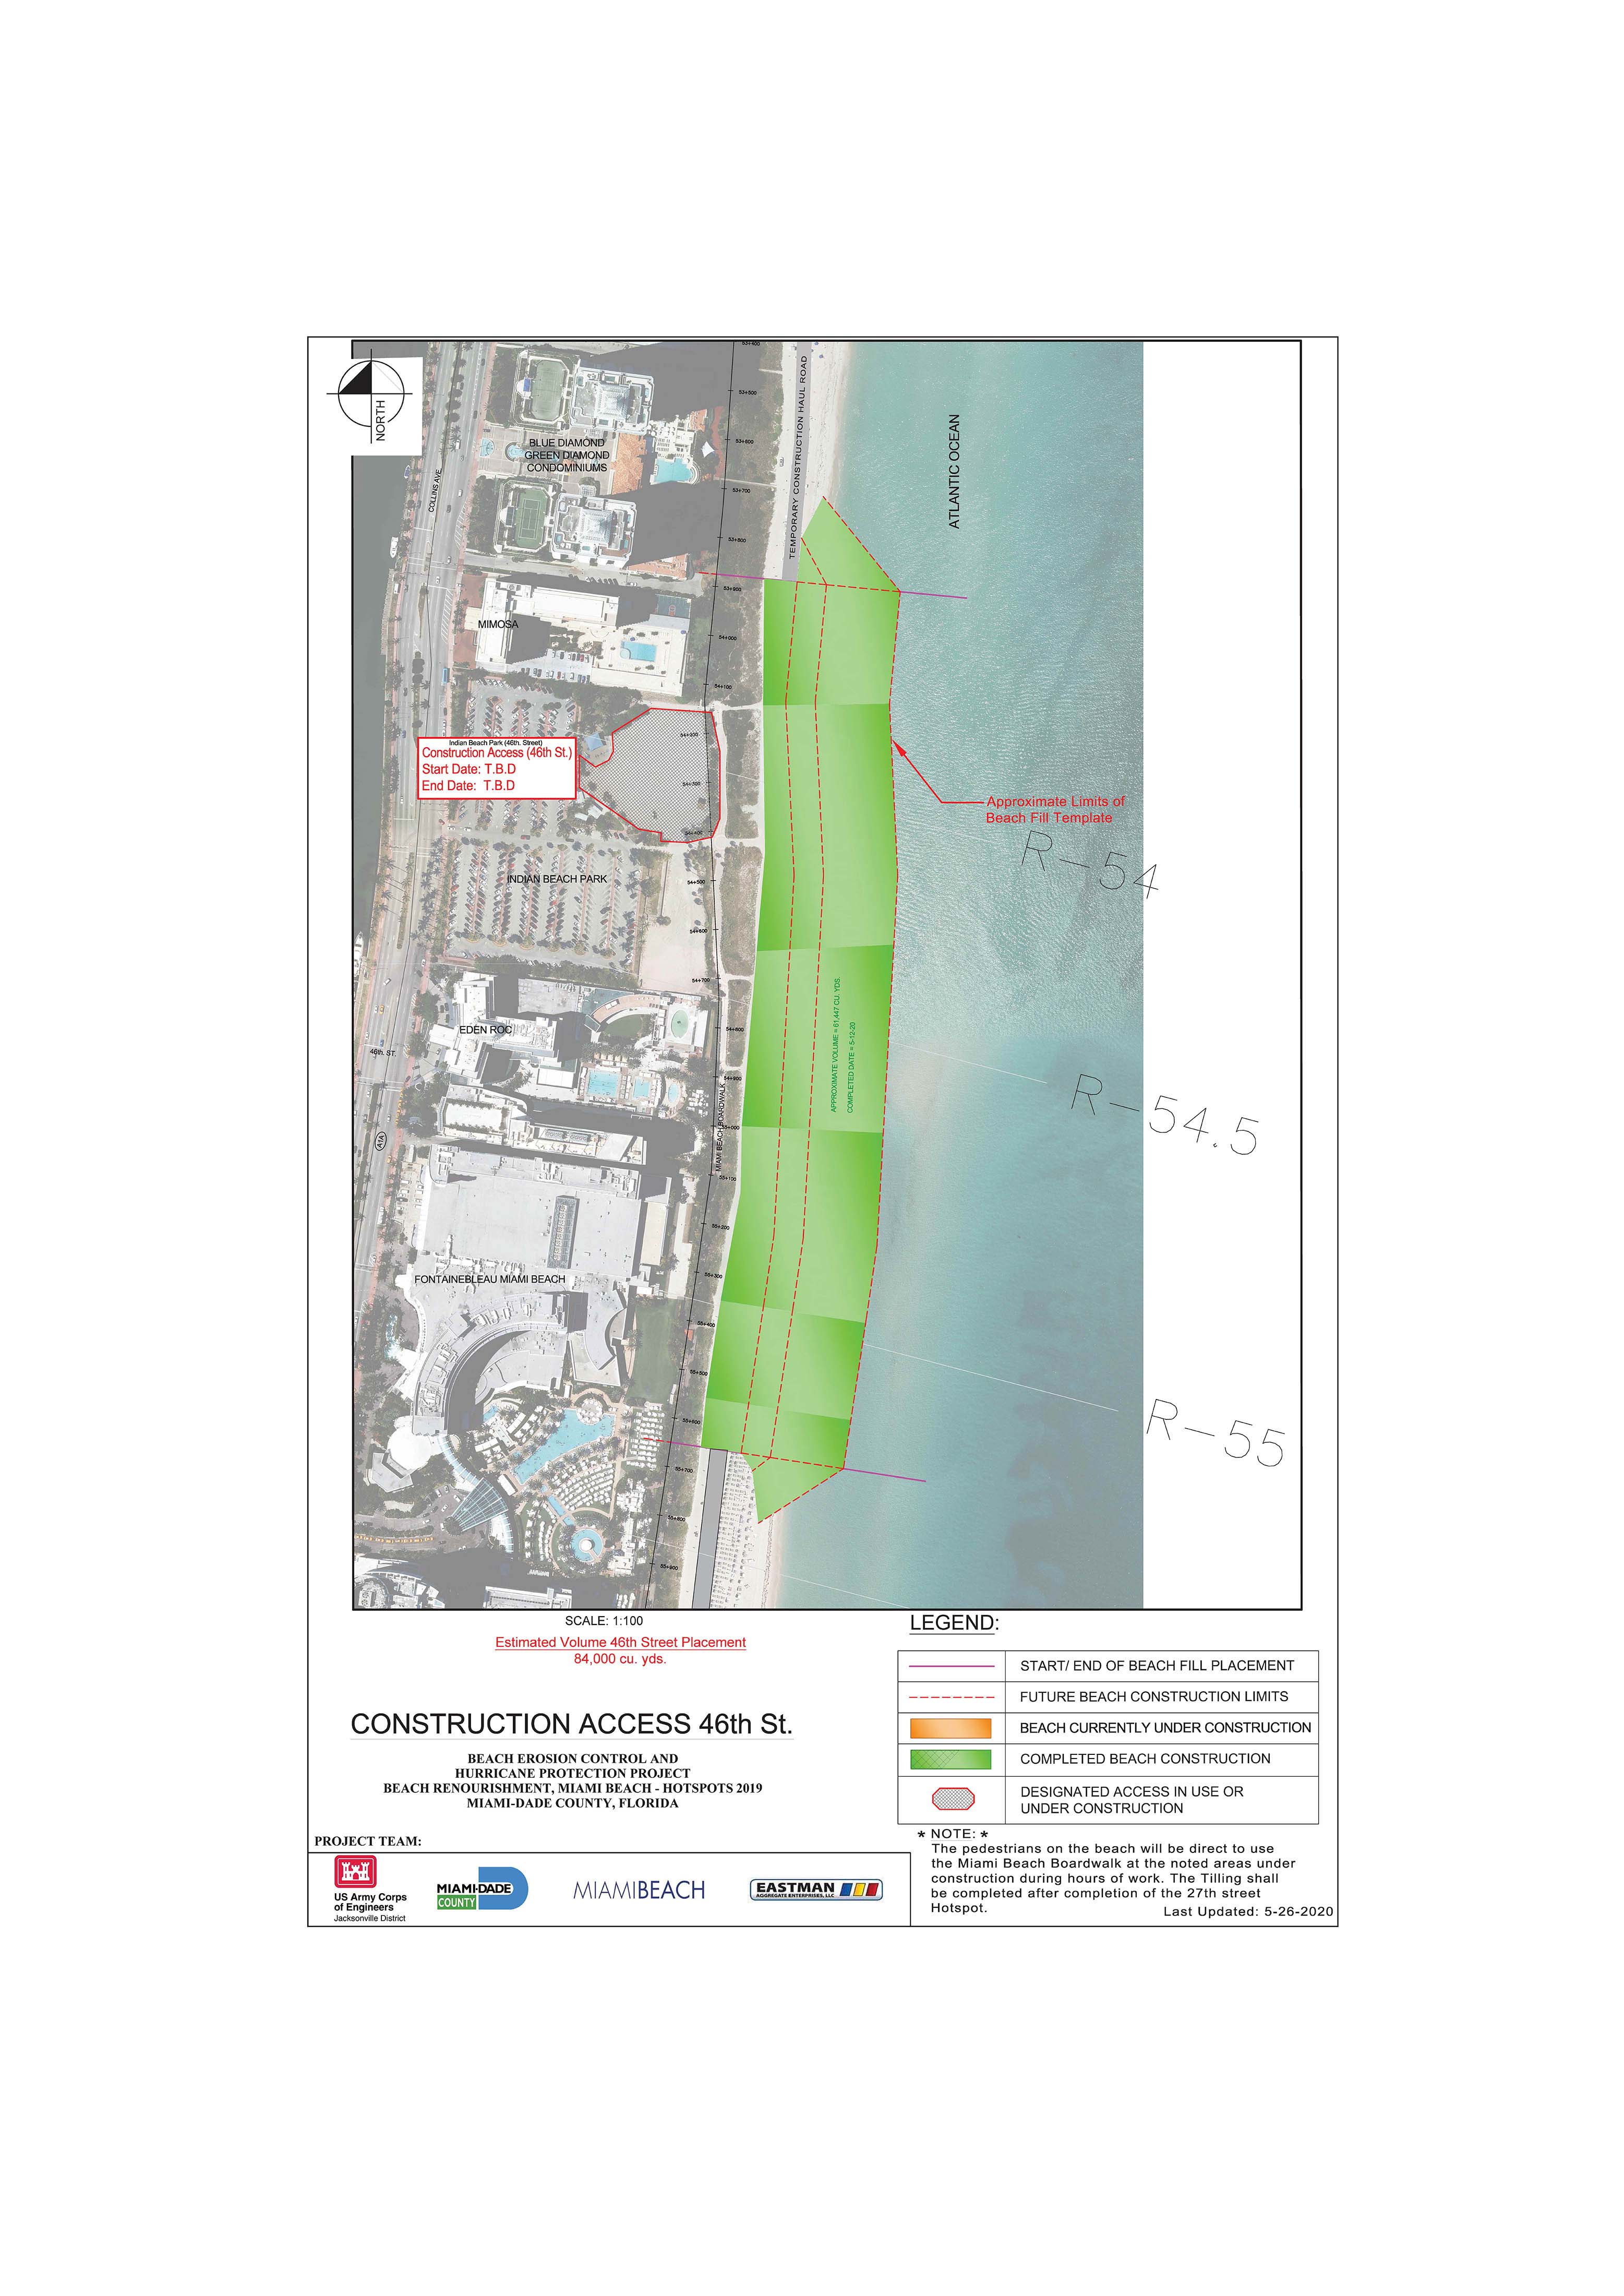 Image showing the Indian Beach Park reach. The end date is listed as to be determined.